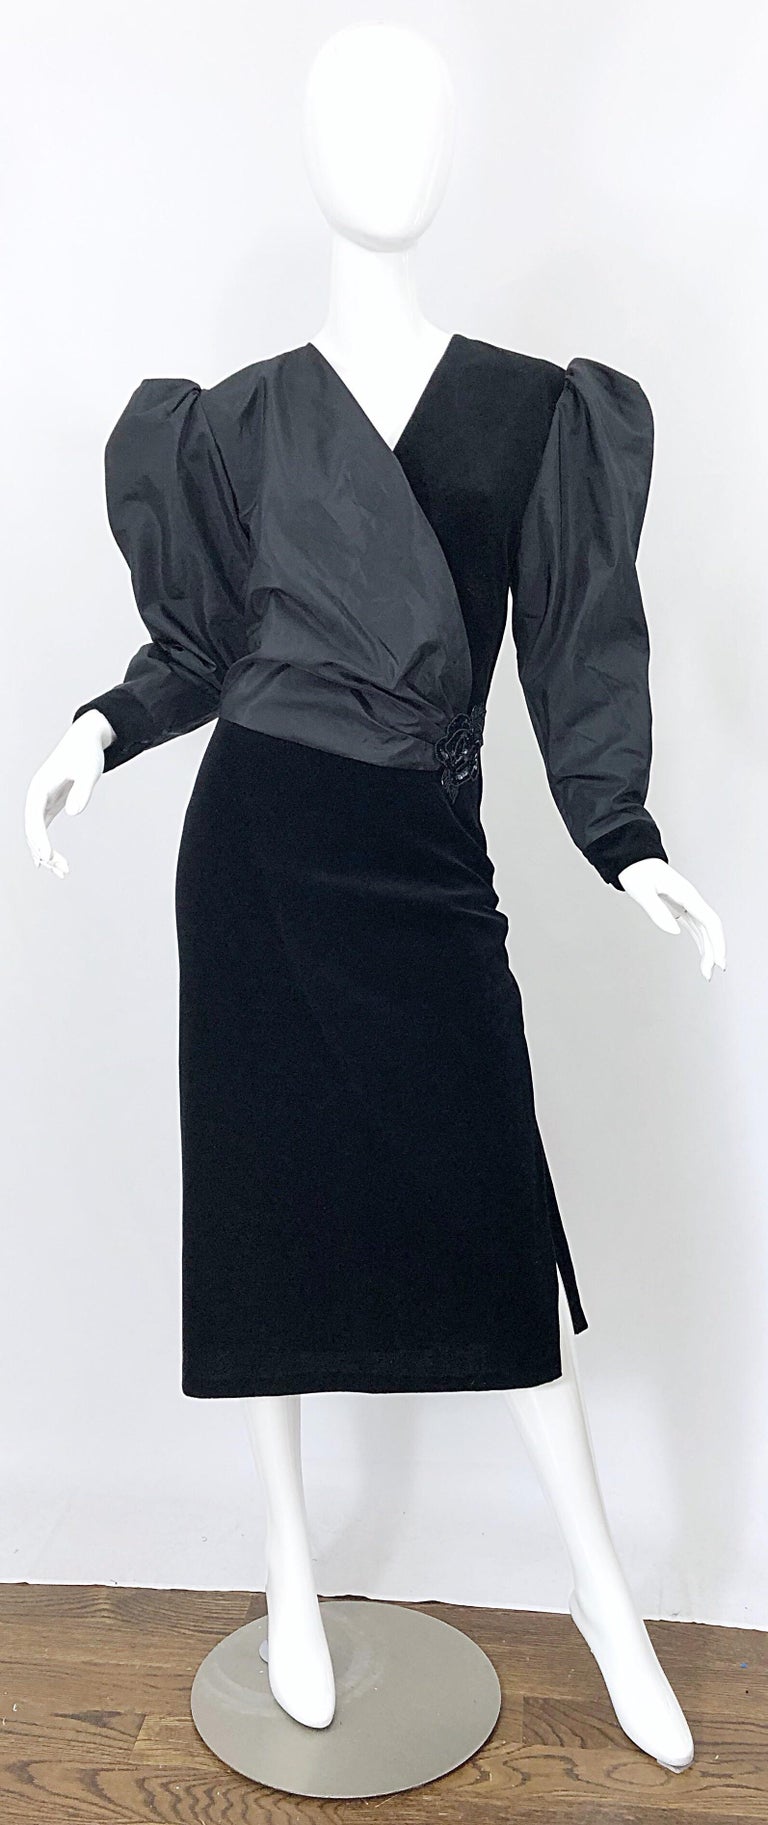 Avant Garde FRANK USHER black taffeta and velvet Size 14 cocktail dress! Features a criss-cross bodice with black taffeta on one side, and black velvet on the other side. Chic puff sleeves add just the right amount of drama. Crystal button at top